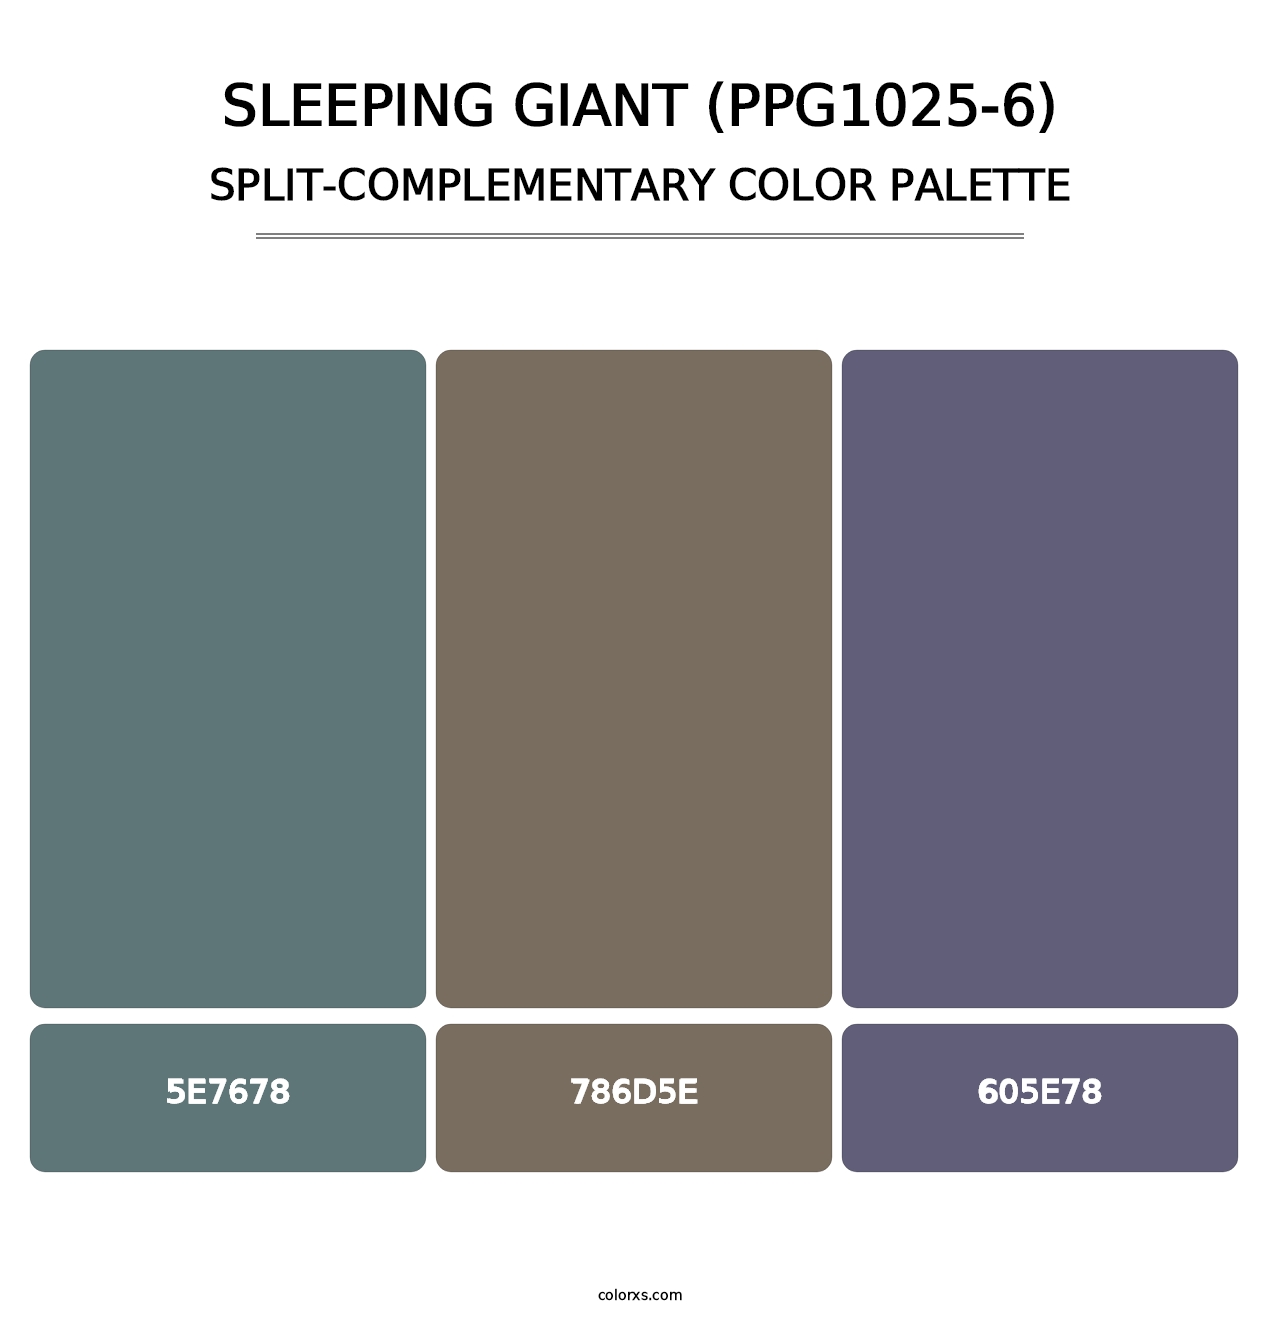 Sleeping Giant (PPG1025-6) - Split-Complementary Color Palette